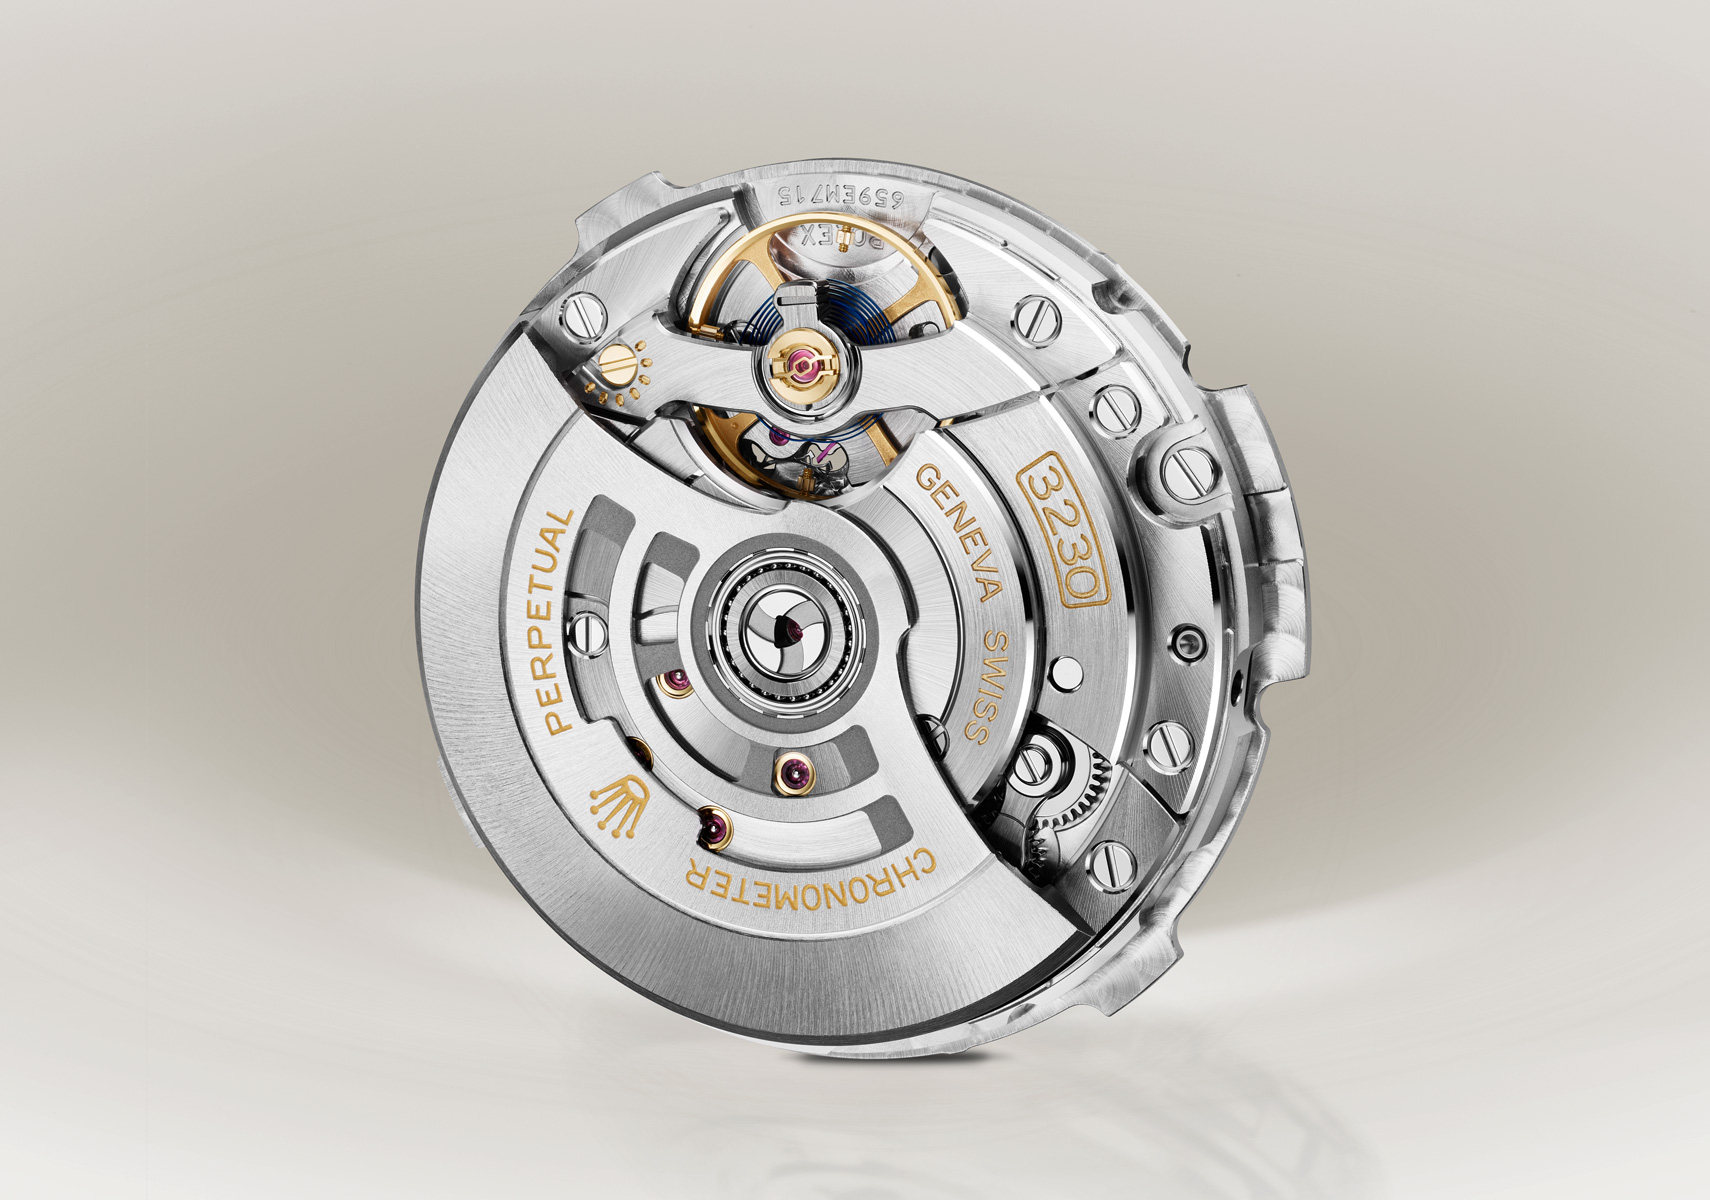 Oyster Perpetual watch at Goldfinger Jewelries - St. Martin St. Marteen St. Barthélemy - Caribbean